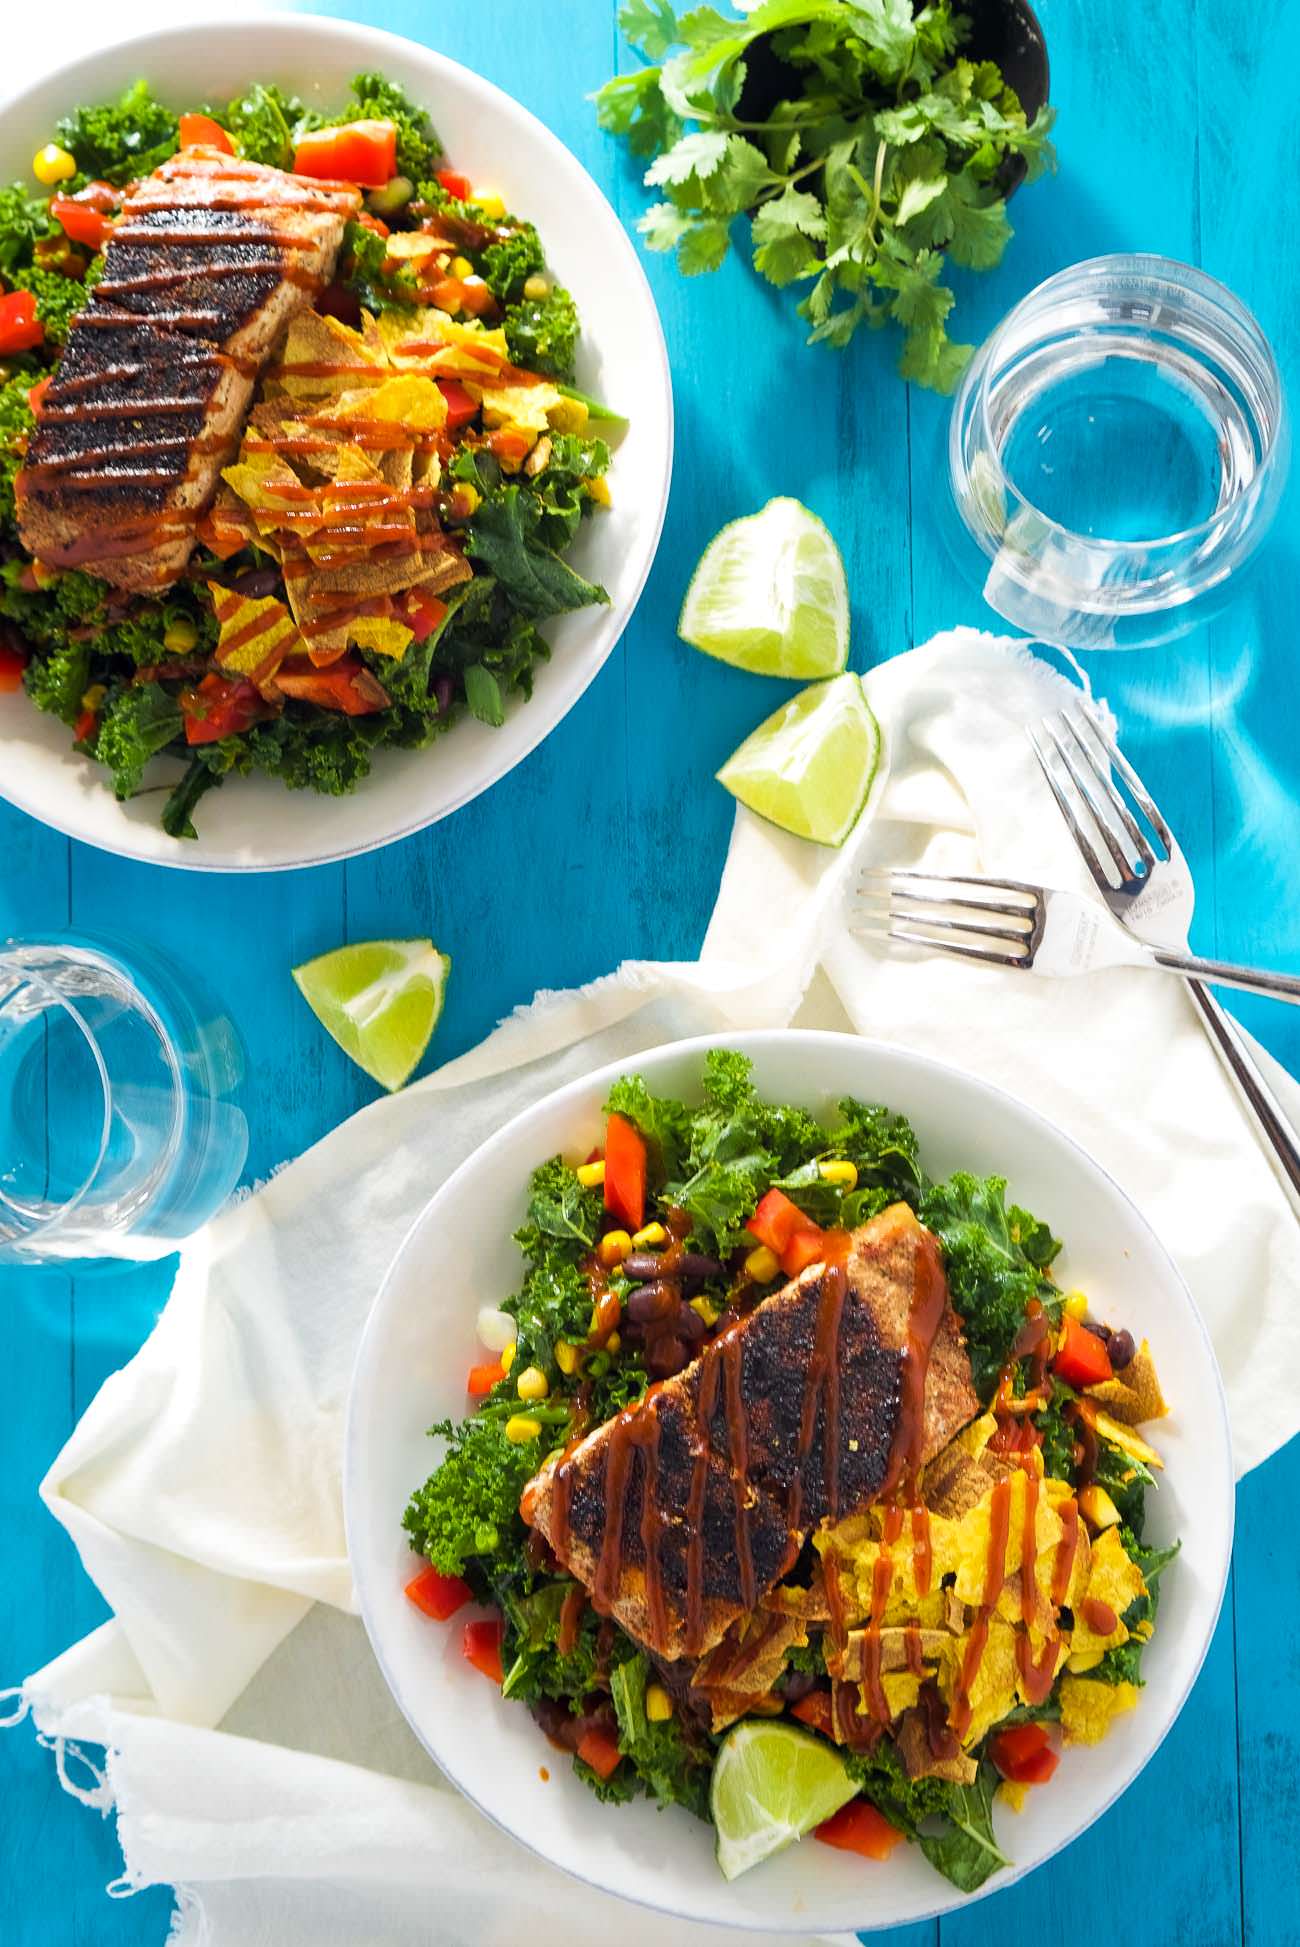 BBQ Salmon Kale Salad is a healthy and updated version of the classic BBQ salad! Filled with bold flavors, crunchy kale, crispy vegetables and all toss in a Honey Chipotle Vinaigrette! One easy to prepare salad you will fall in love with!